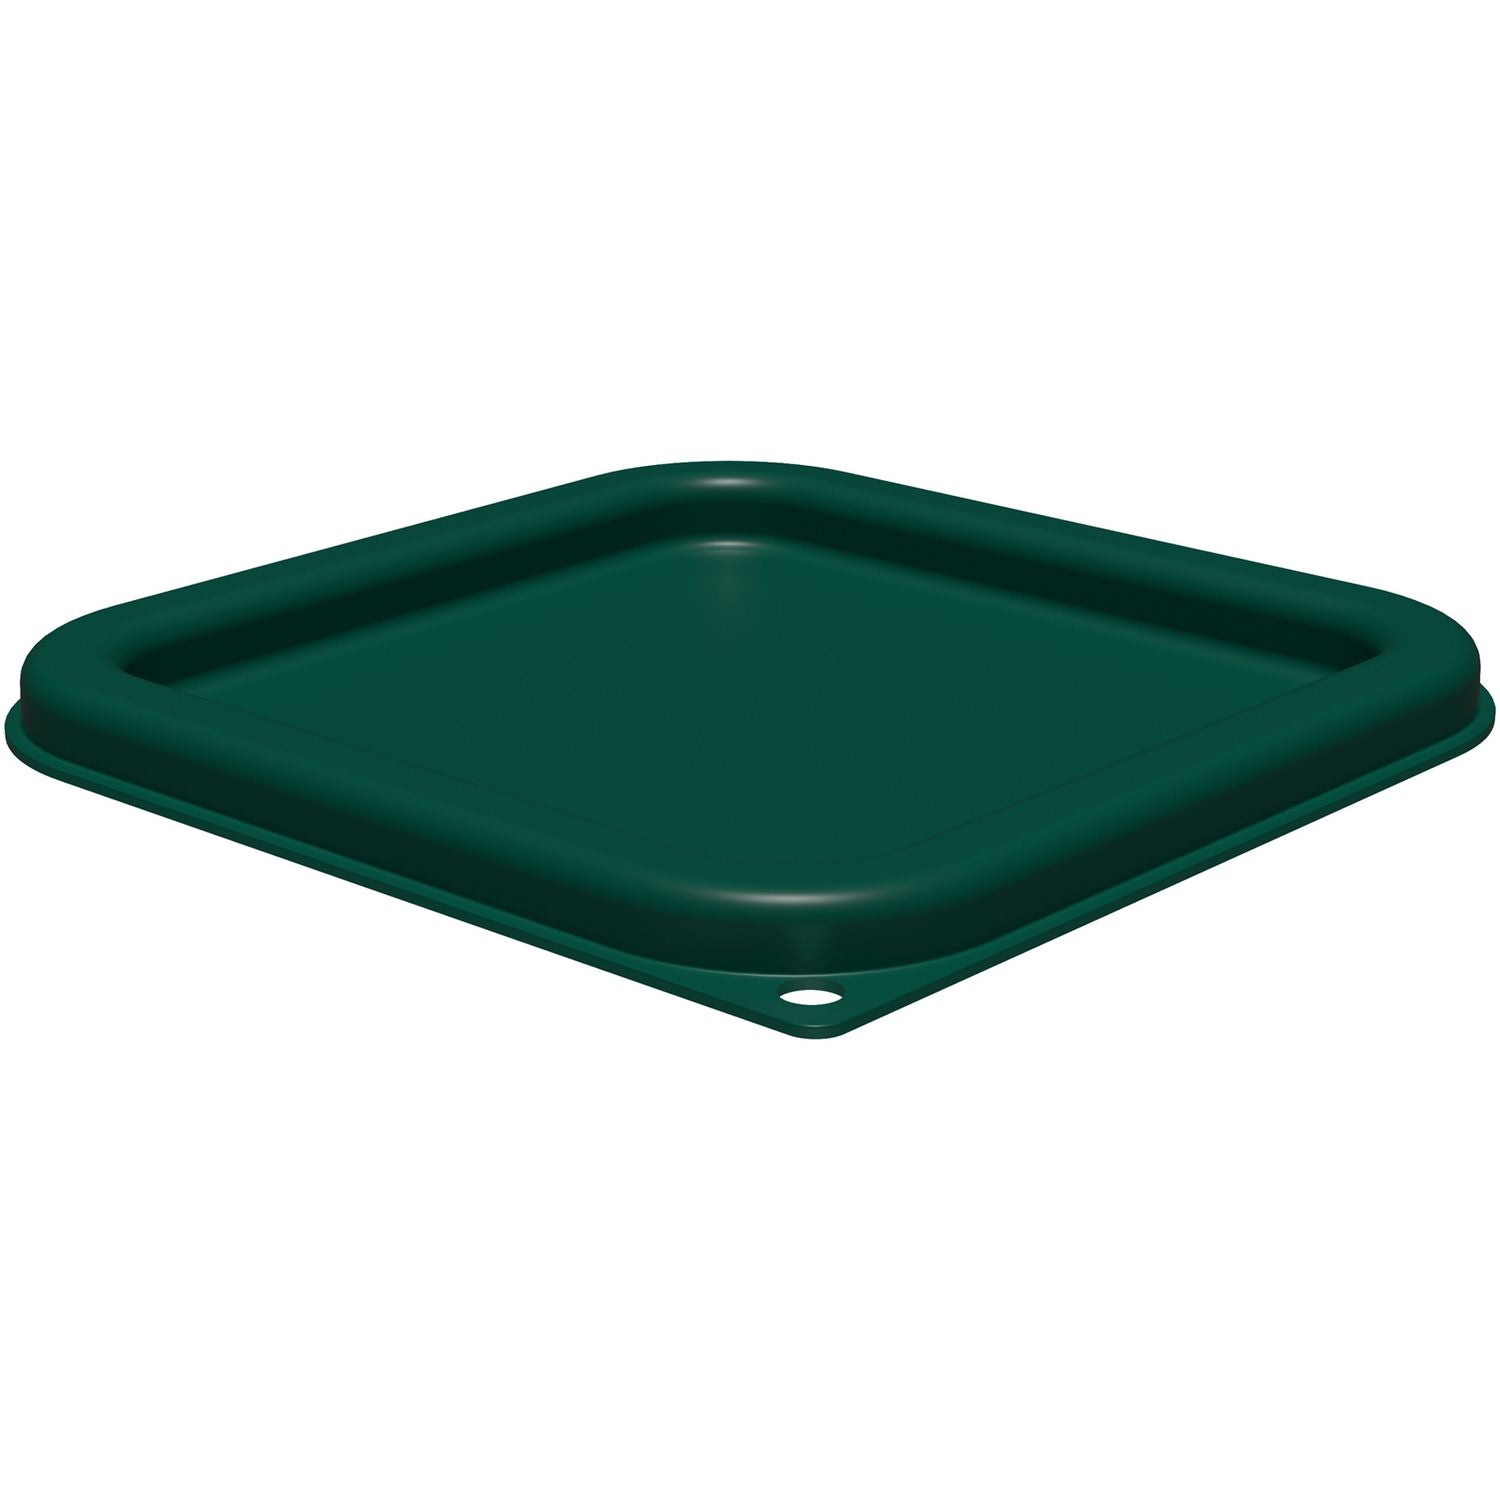 squares-food-storage-container-lid-731-x-731-x-063-forest-green-plastic_cfs1197008 - 1